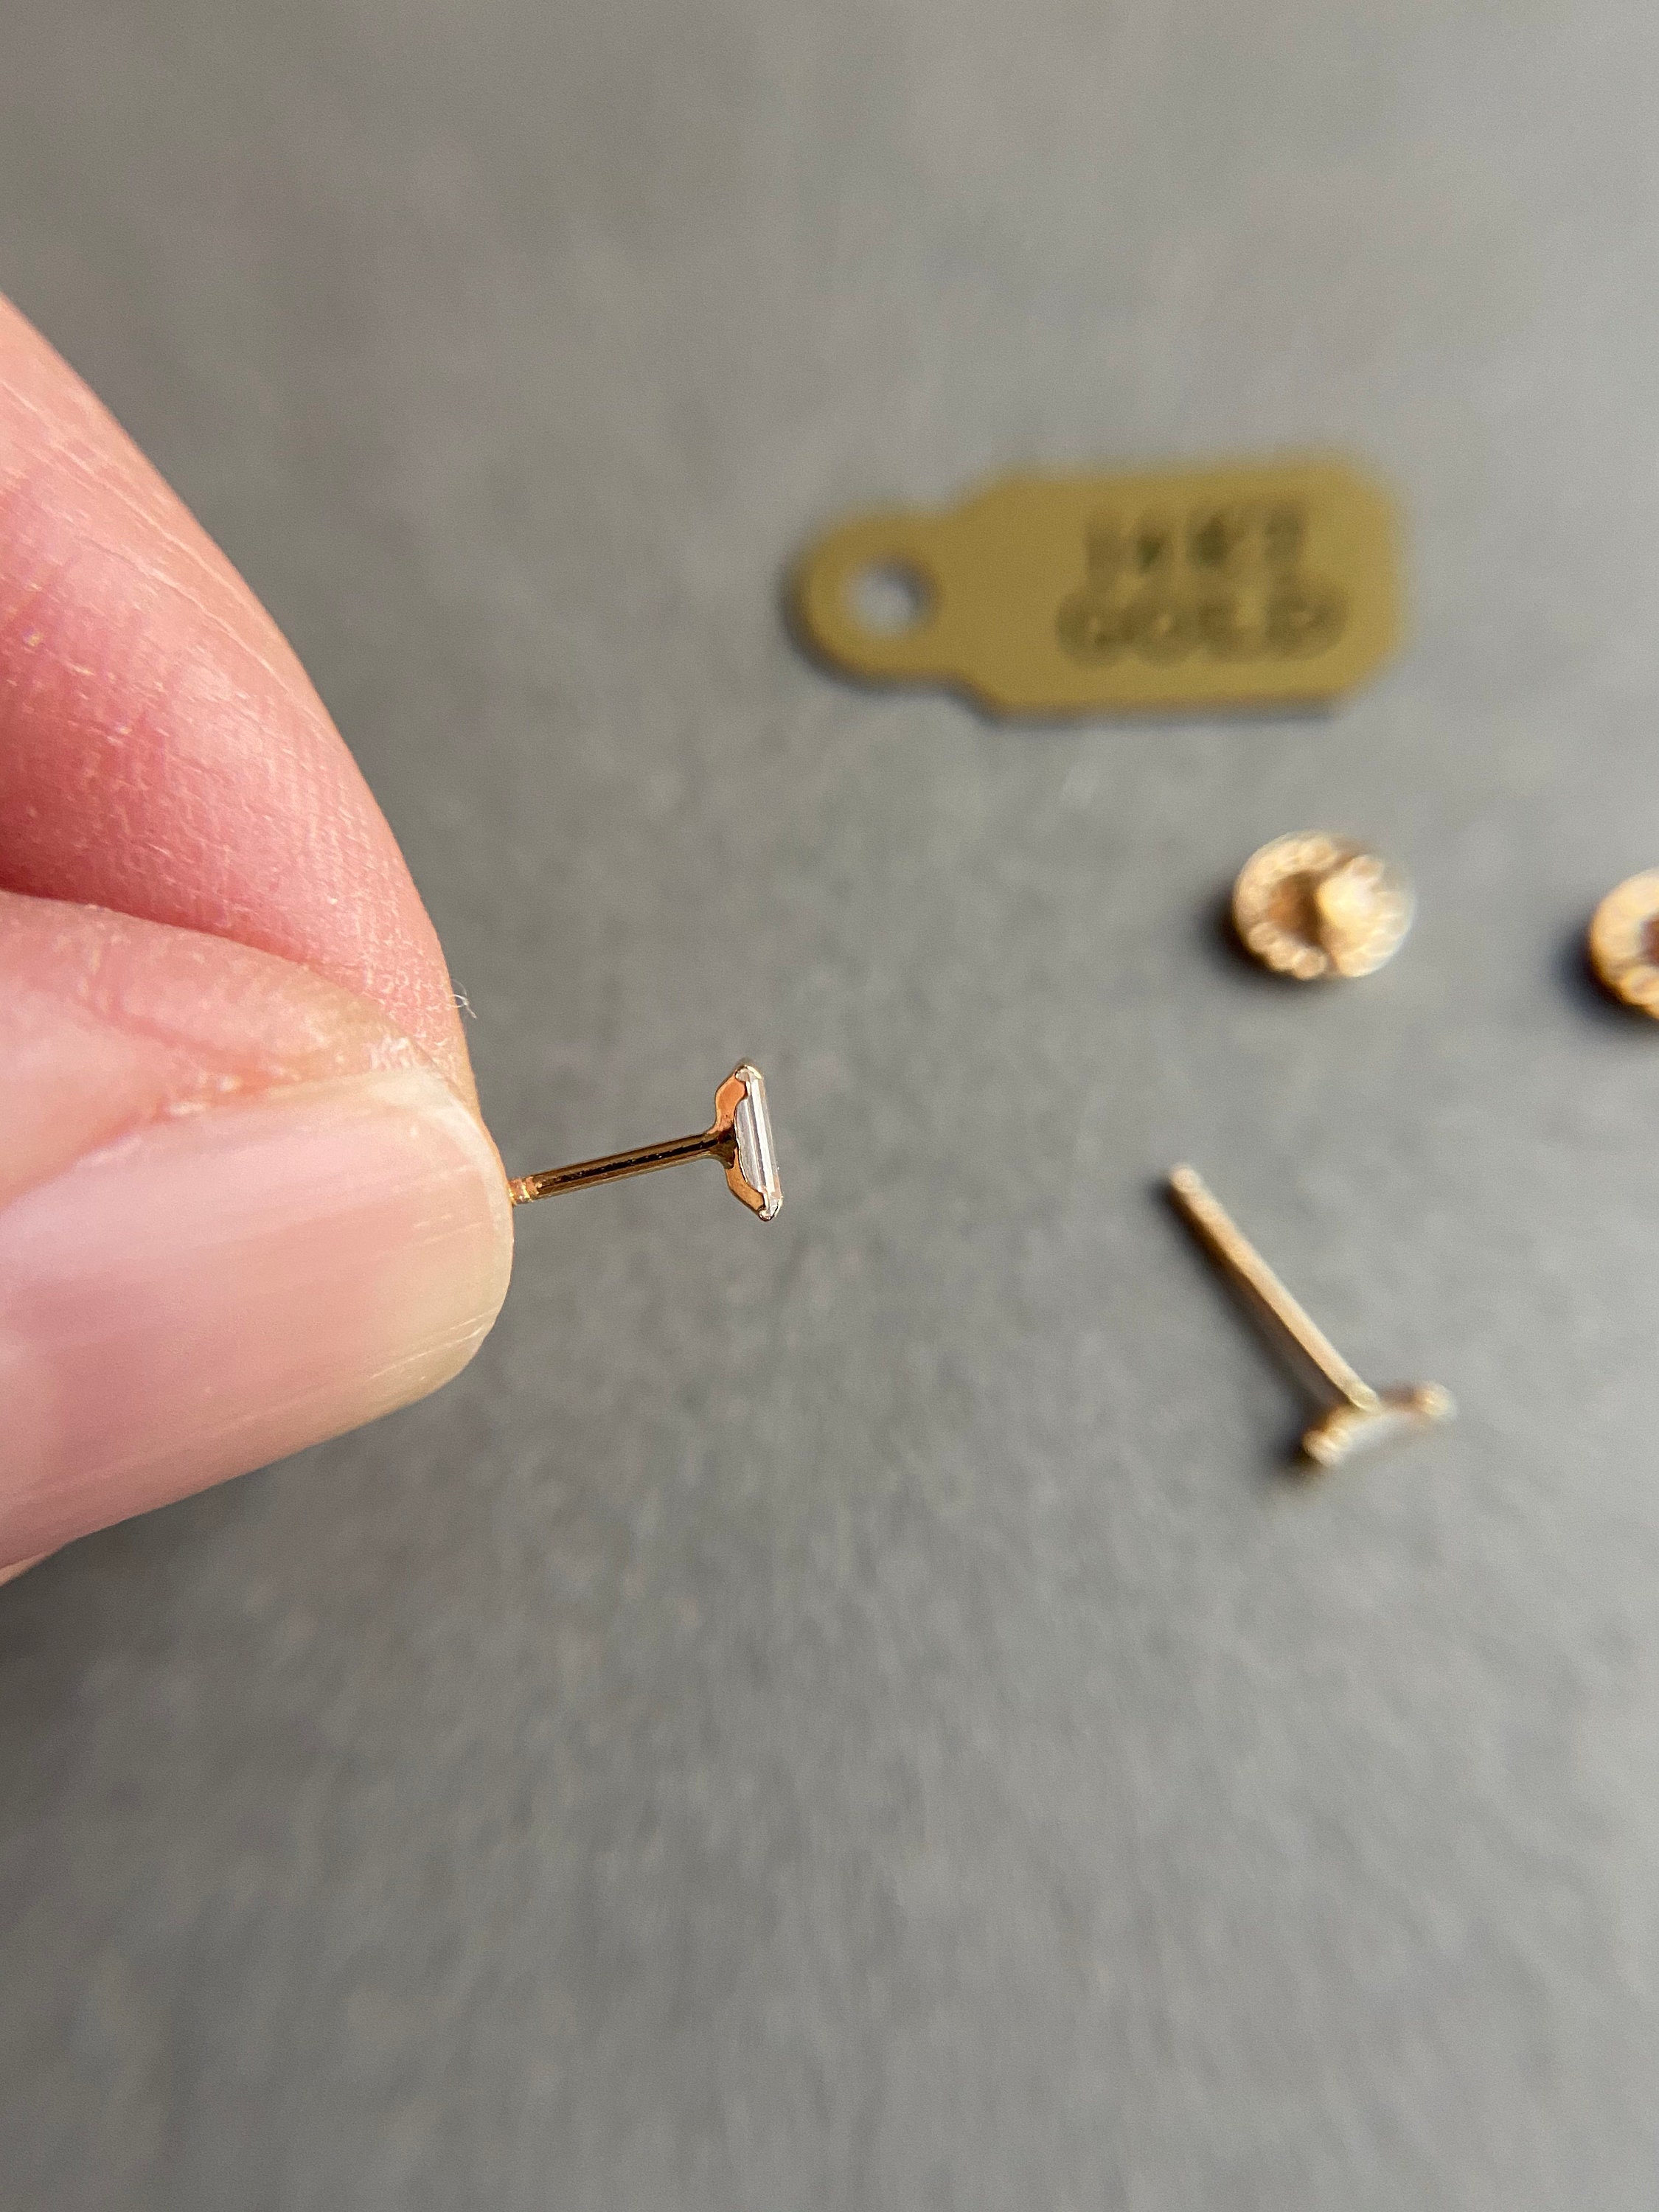 6 Qty. Very Tiny Genuine 14kt. Gold Earring Back, Very Small & for Thin  Posts (4.0x2.5mm Earnuts) - See Photos